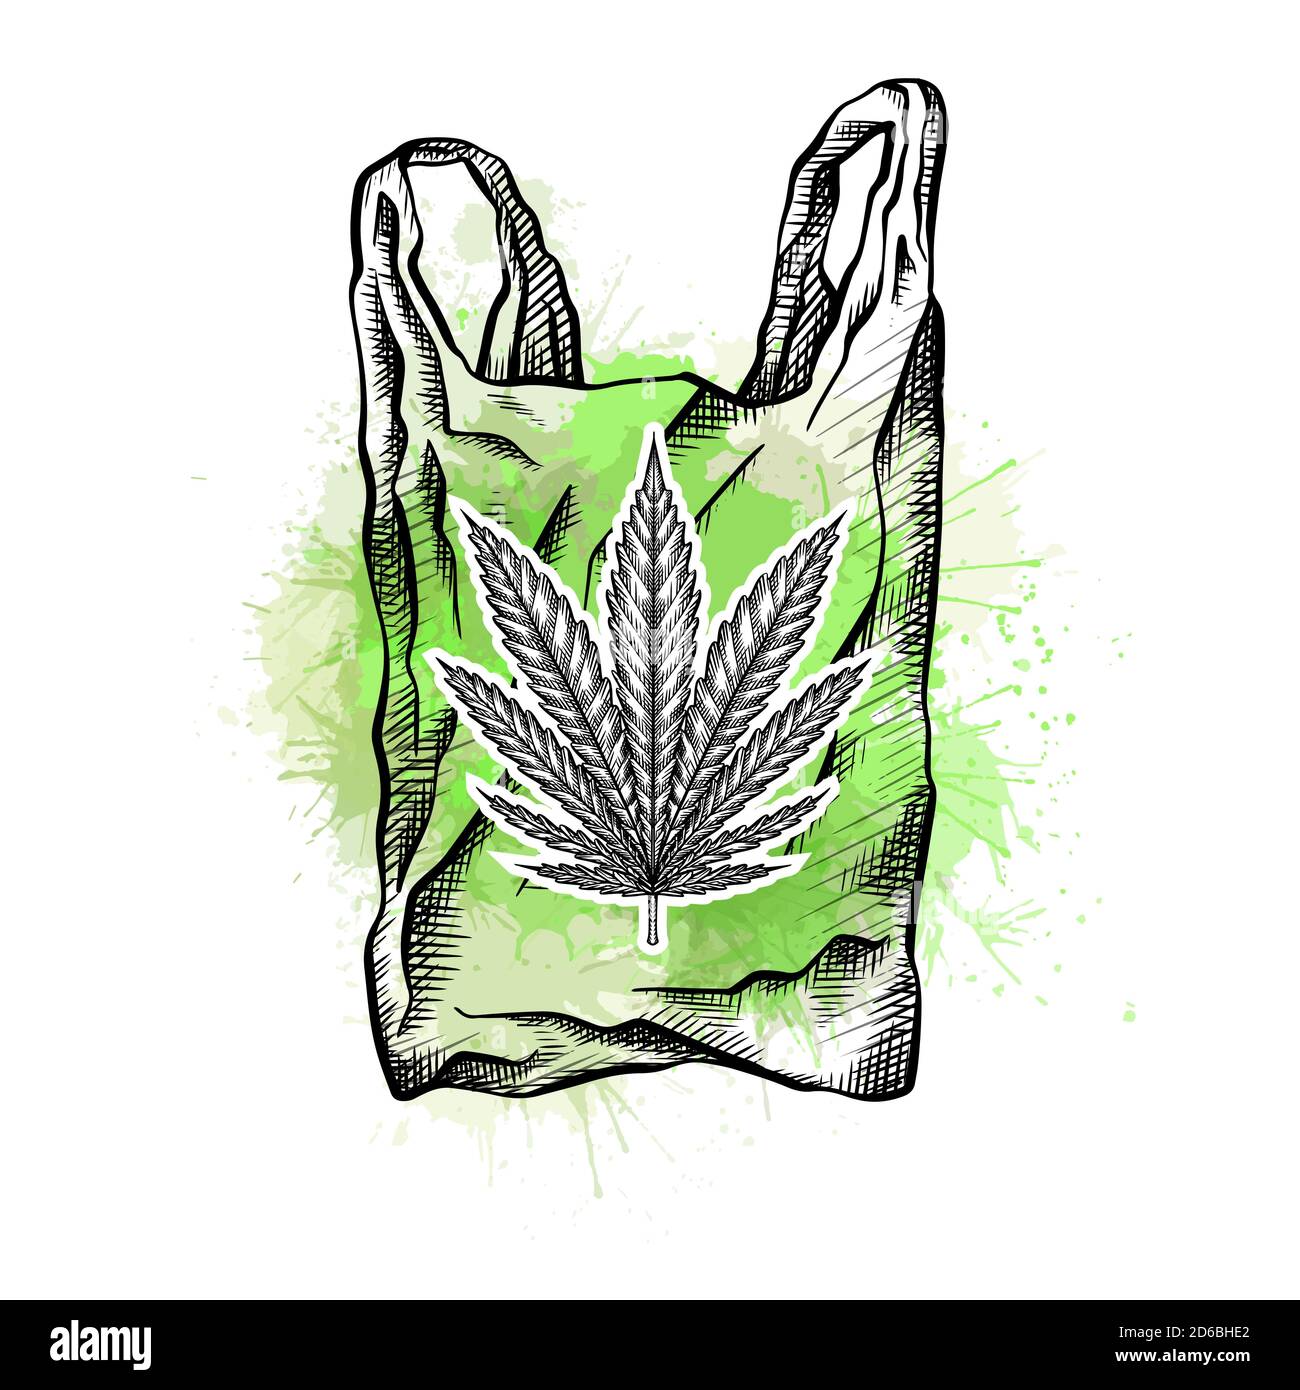 Nature bag with hatching, marijuana leaf and green watercolor splashes. Eco friendly bag zero waste. Recycled waste. Ecological problem. Vector drawin Stock Vector